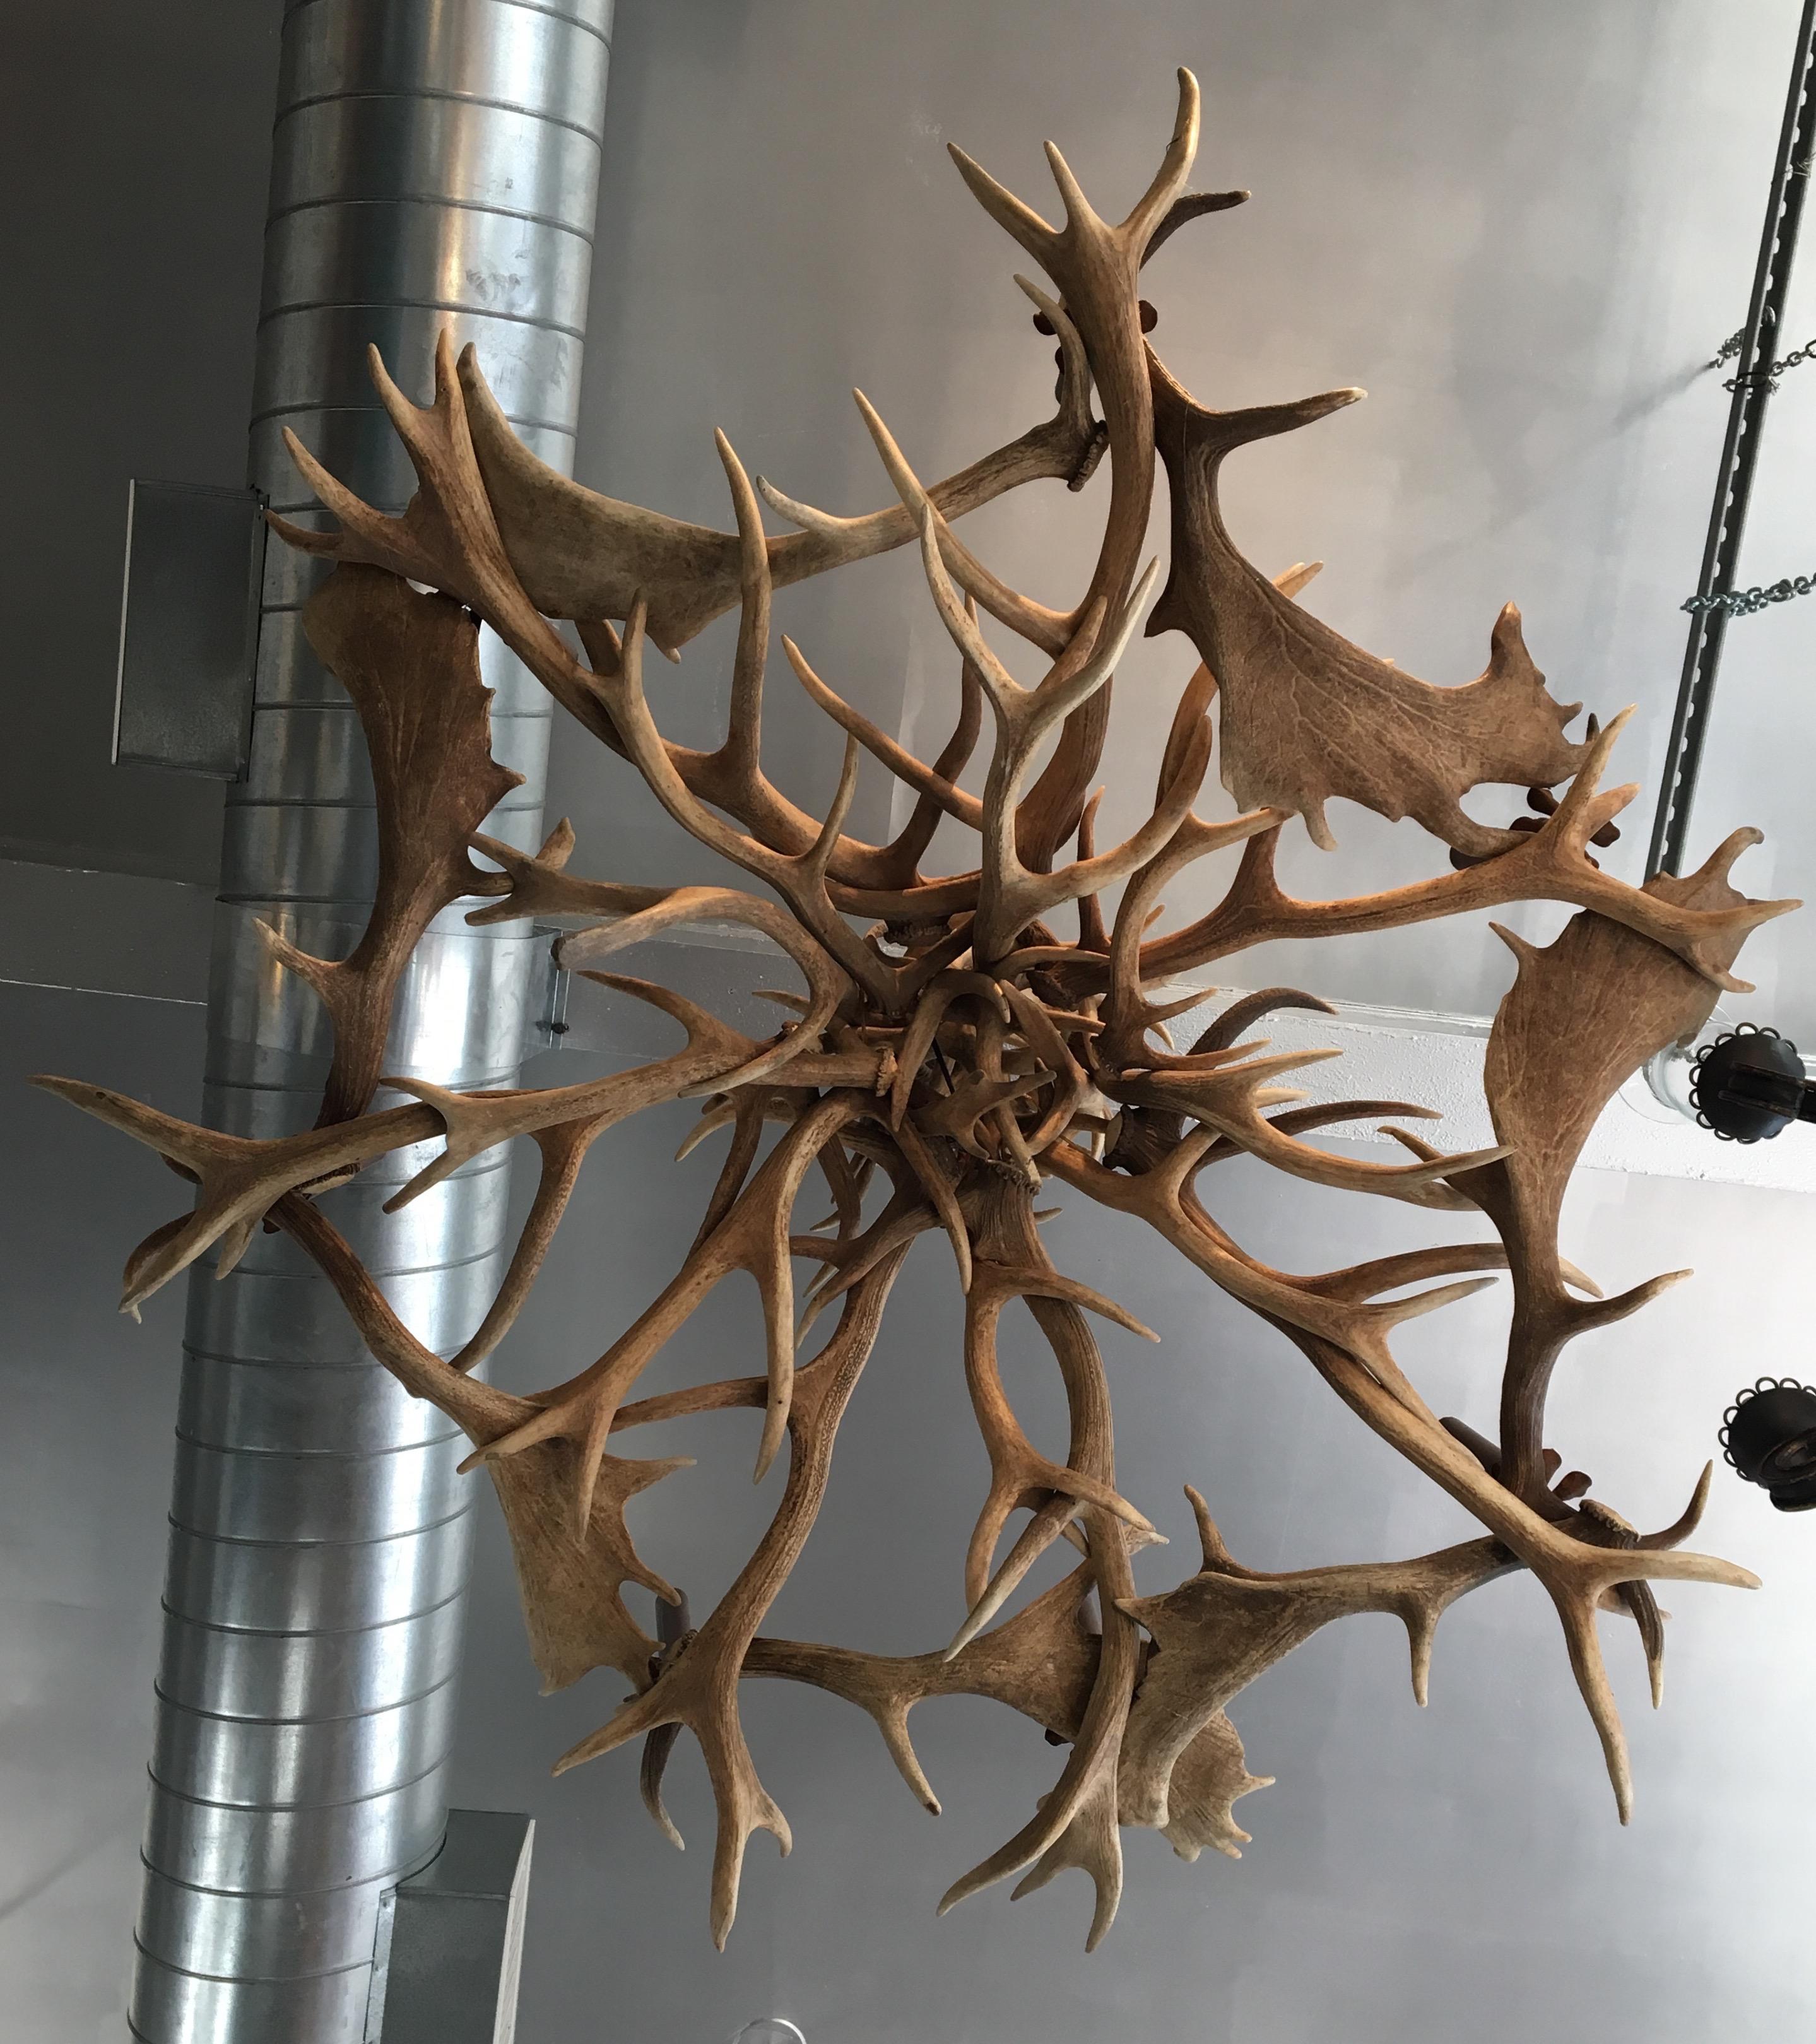 Large scale naturally bleached deer antler 6-light chandelier. Charming rusted metal floral bobeches, can be rewired to your height specifications. 
Avantgarden Ltd. cultivates unexpected and exceptional lighting, furniture and design. Please visit